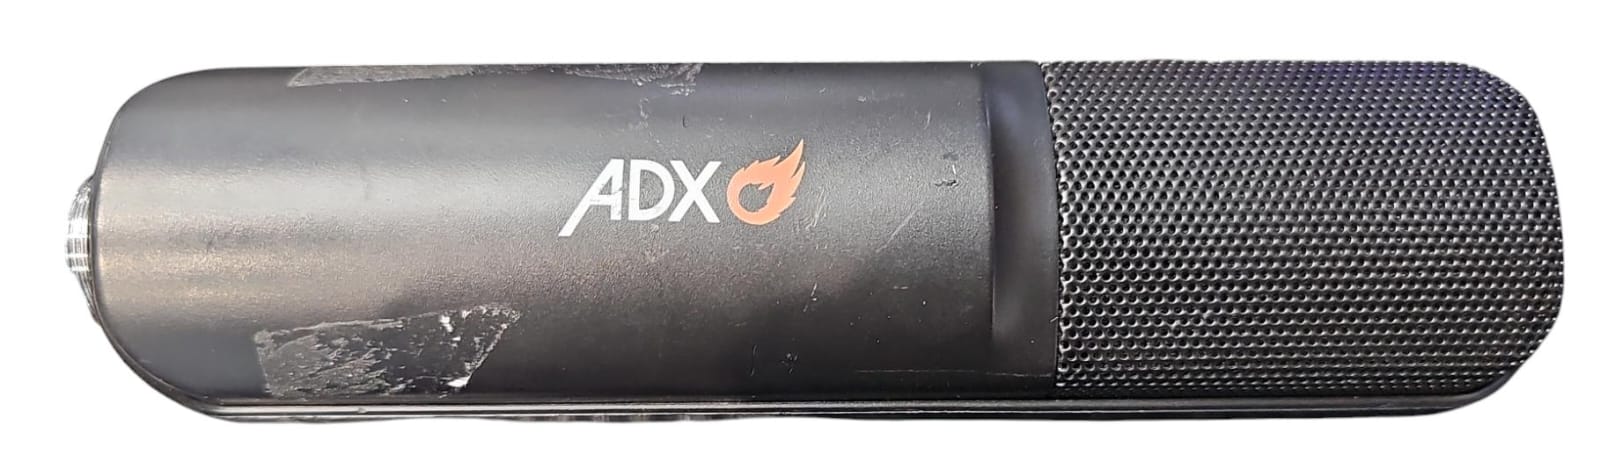 ADX Microphone